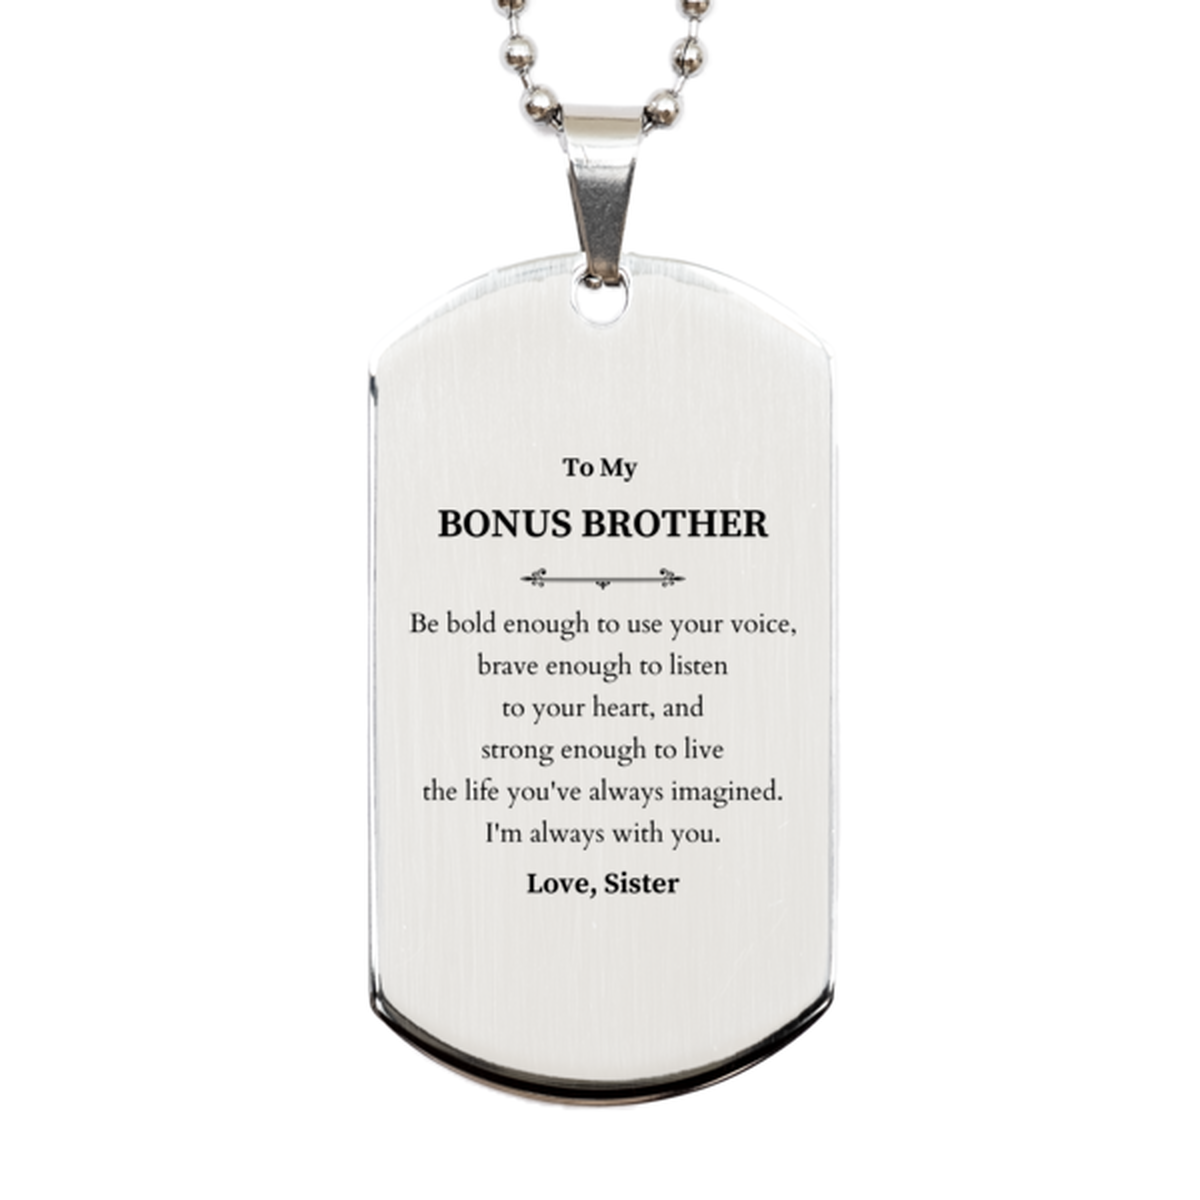 Keepsake Bonus Brother Silver Dog Tag Gift Idea Graduation Christmas Birthday Bonus Brother from Sister, Bonus Brother Be bold enough to use your voice, brave enough to listen to your heart. Love, Sister